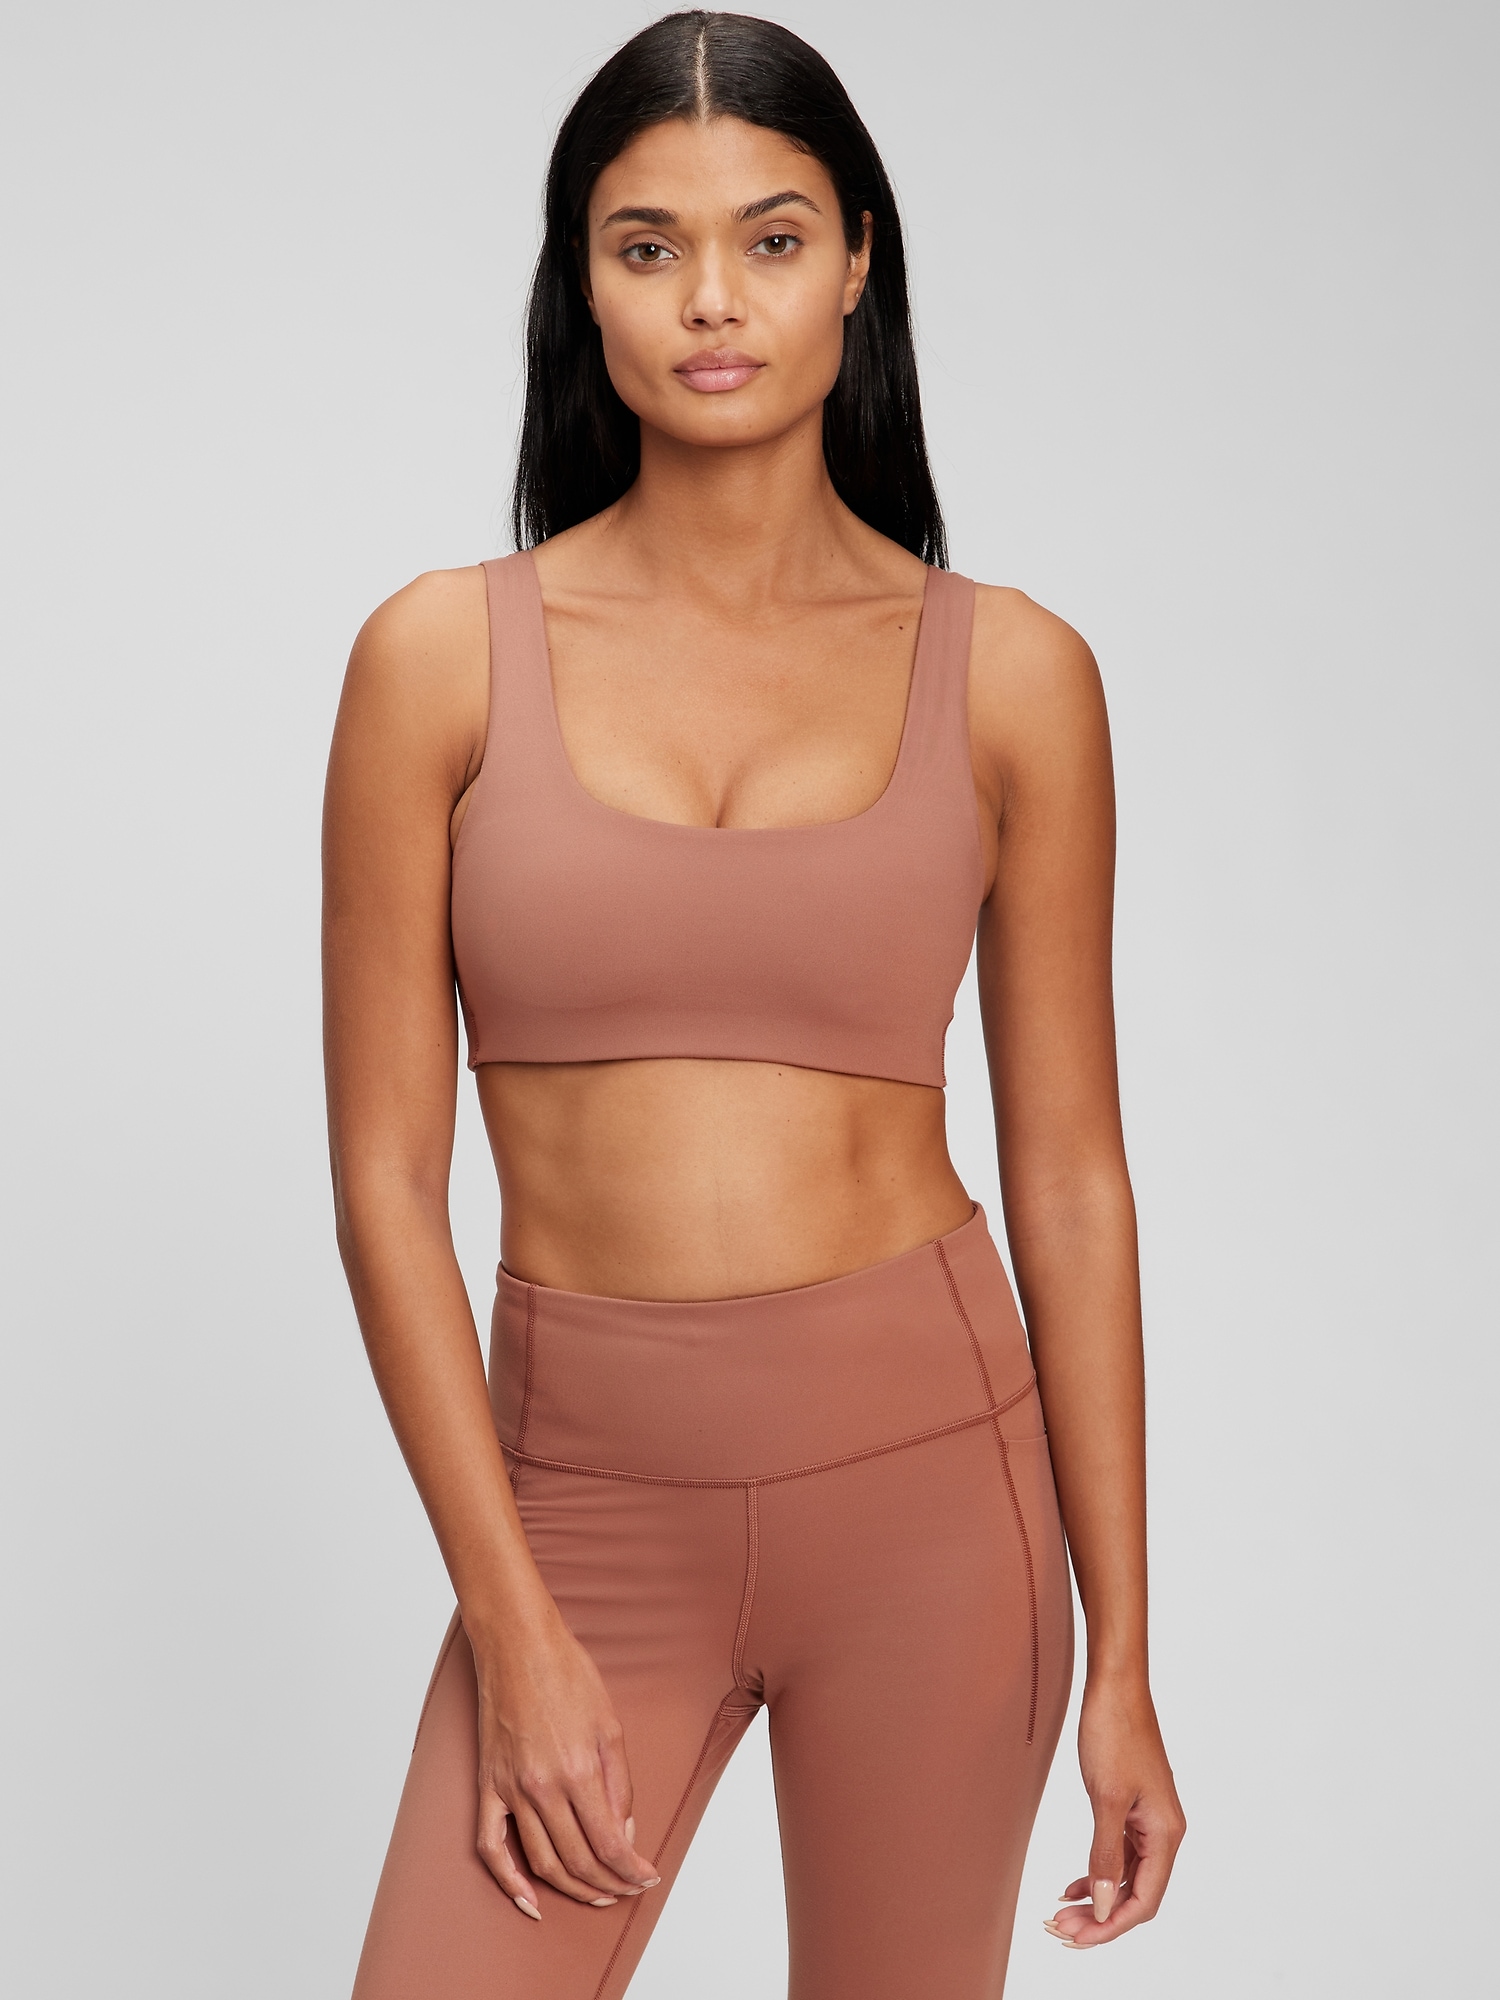 Gap GapFit Low Impact Linear V-Back Jacquard Bra, We Compared 10 Gap  Sports Bras With Varying Levels of Support (and They're on Sale)